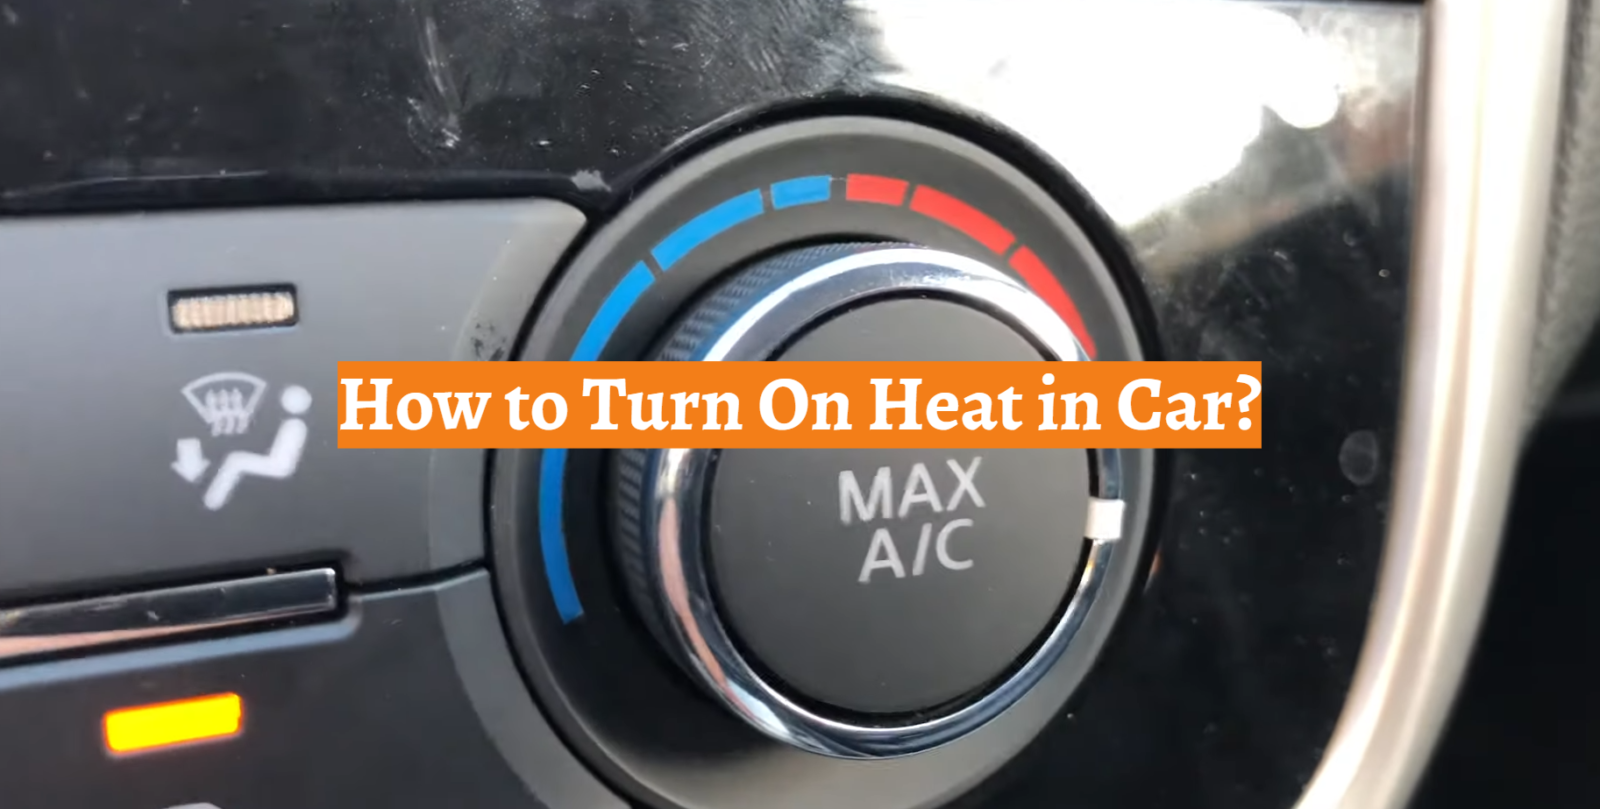 How to Turn On Heat in Car?